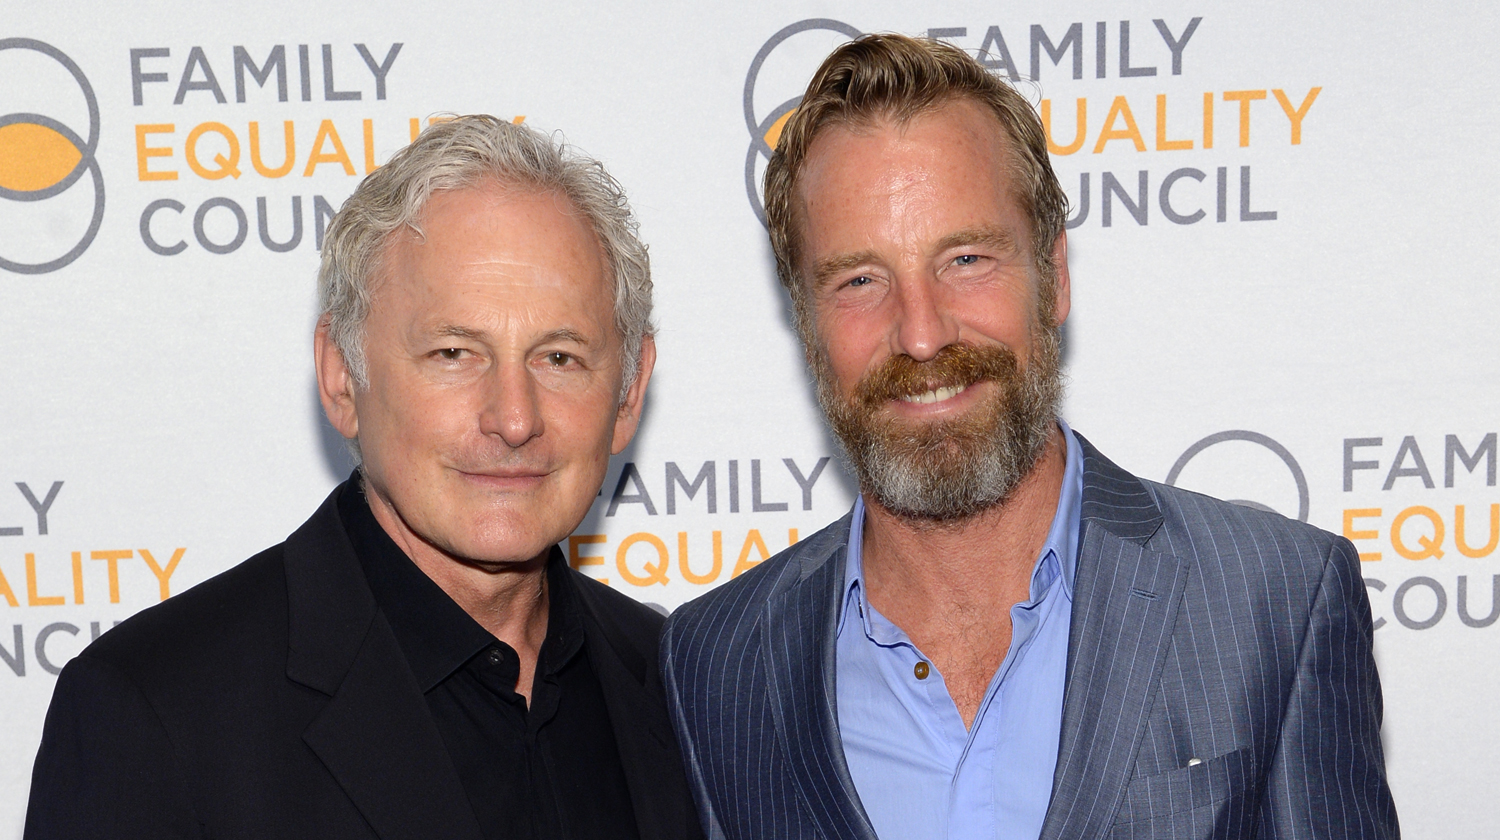 Victor Garber and his longtime love Rainer Andreesen have tied the knot aft...